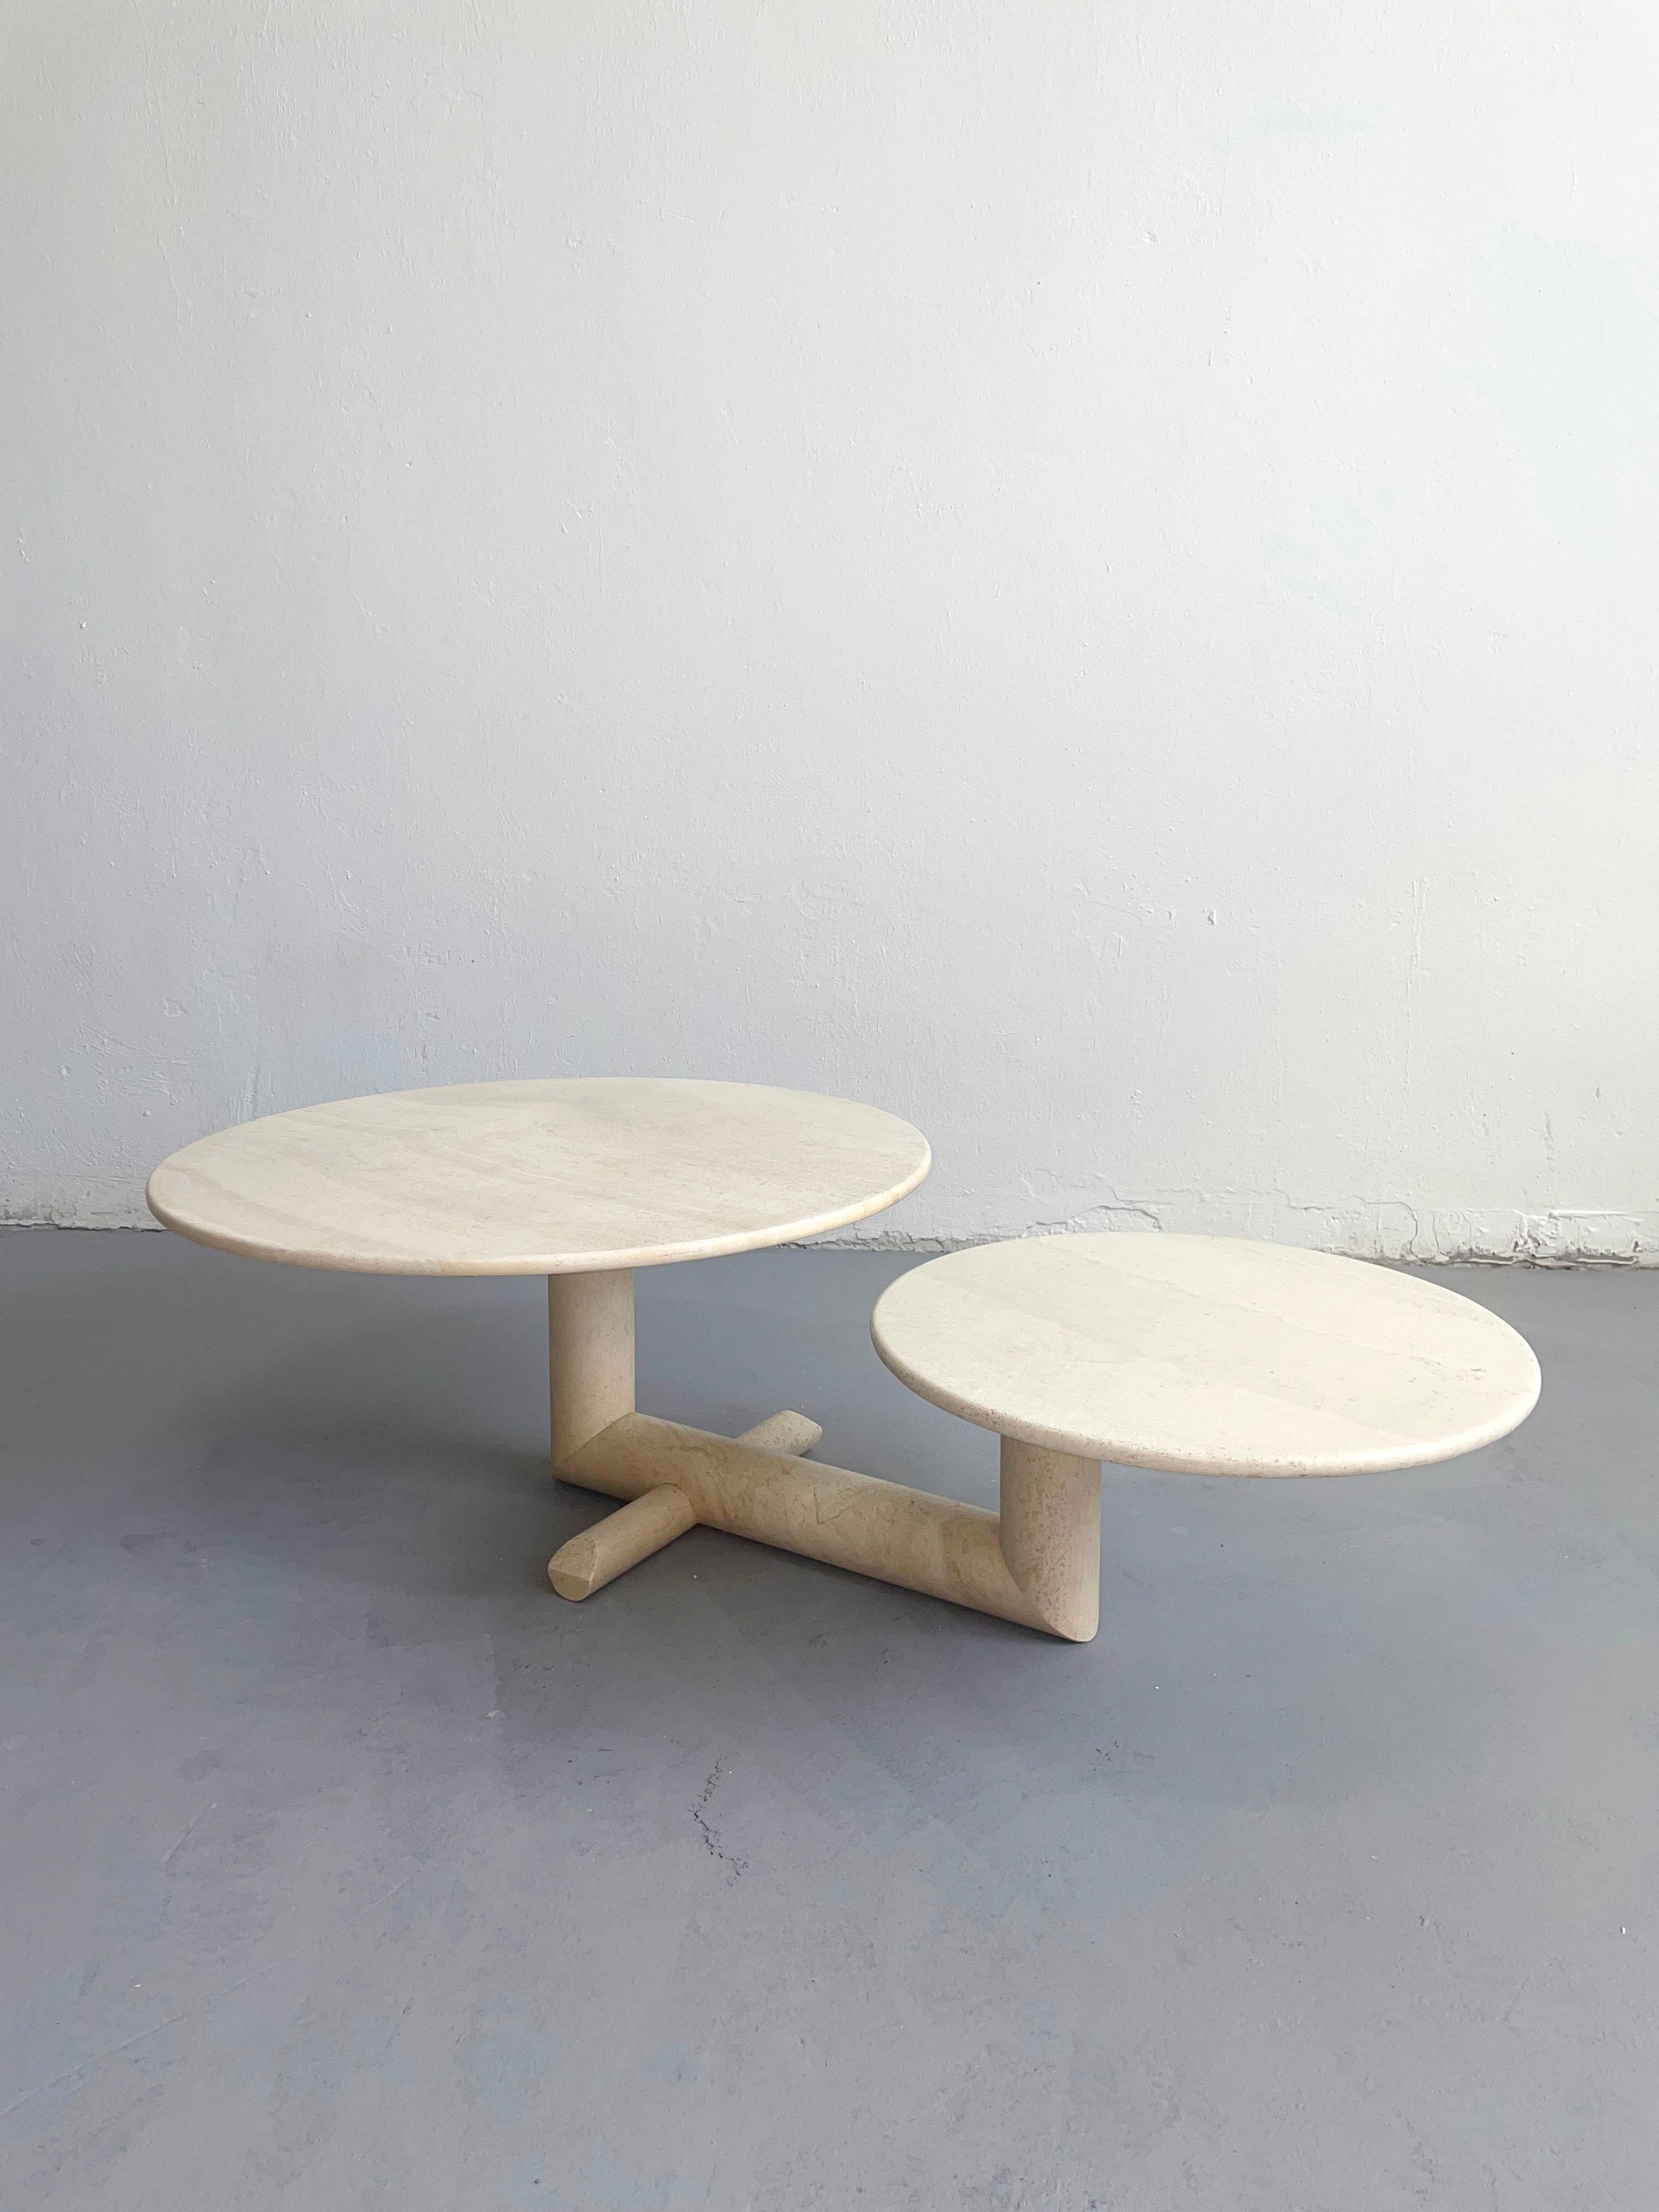 Sculptural asymmetrical travertine coffee table, manufactured in Italy in the '80s.

The table features two polished round travertine plates and a cross-shaped base.
The length of the table can be adjusted by rotating the plates (115 to 155 cm) -